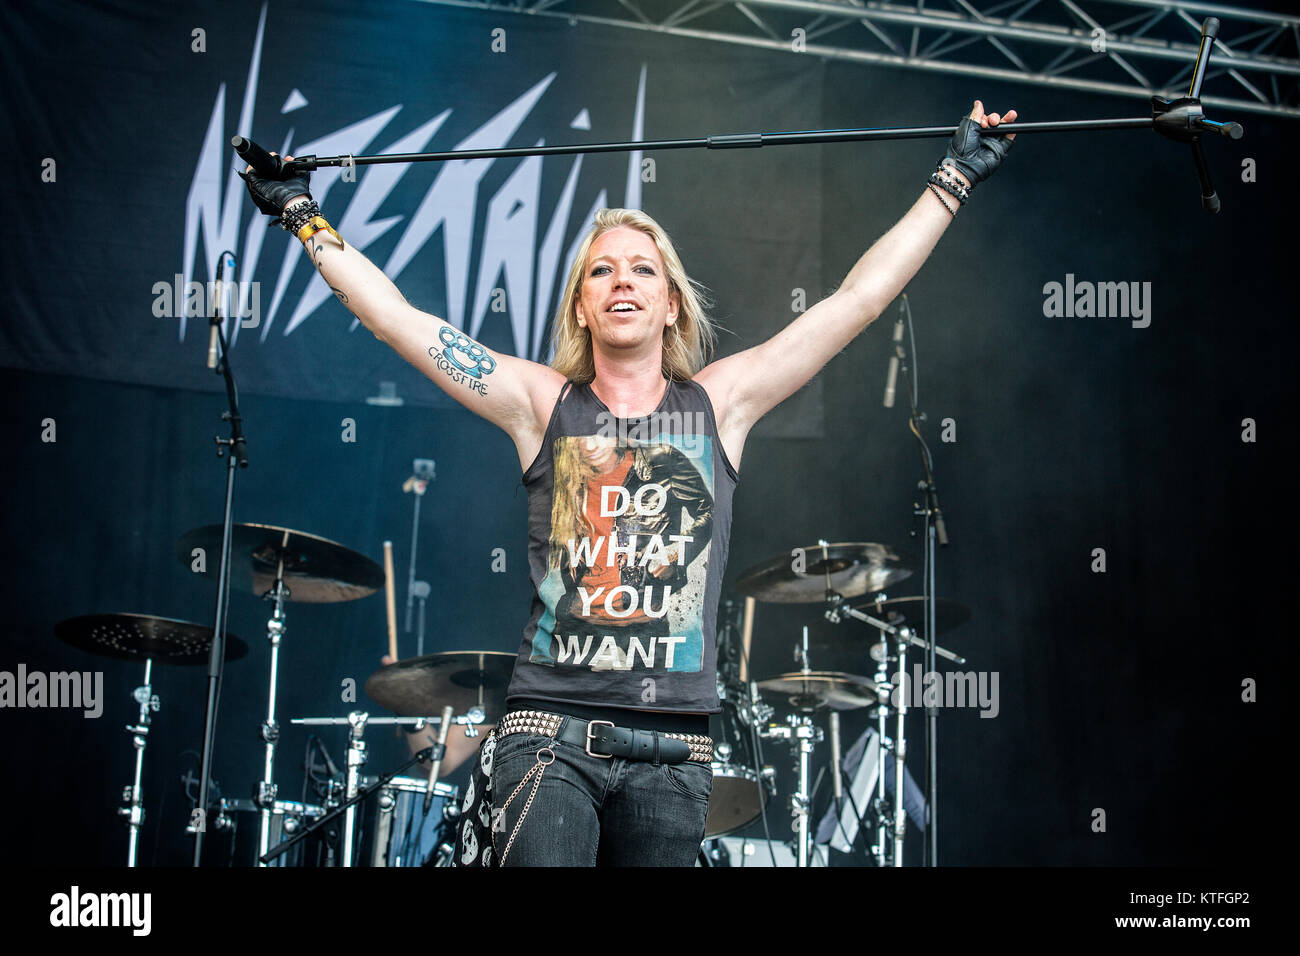 The Norwegian rock band NiteRain performs a live concert at the Sweden Rock Festival 2016. Here vocalist Sebastian Tvedtnæs is seen live on stage. Sweden, 11/06 2016. Stock Photo